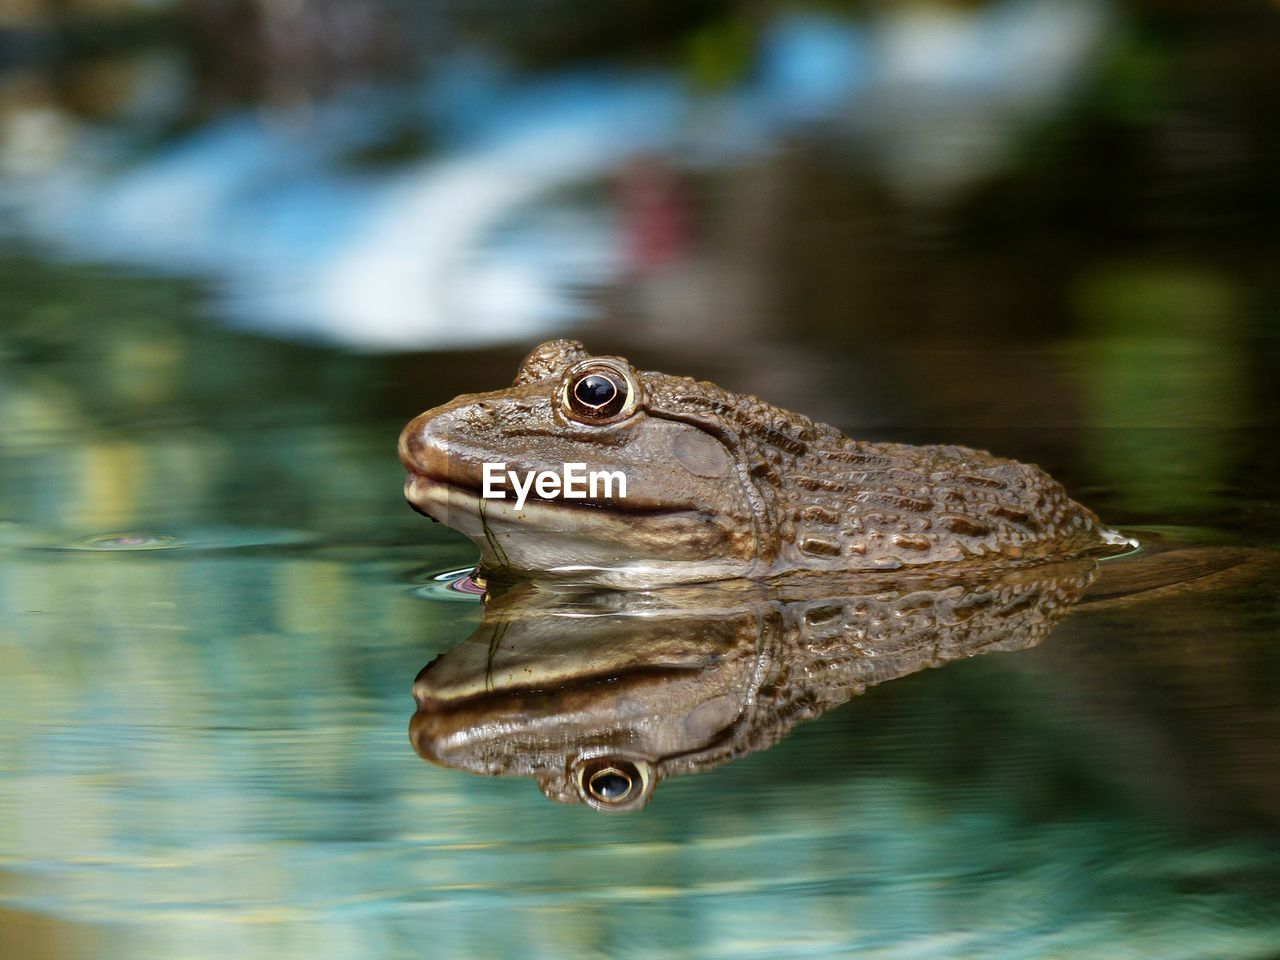 Close-up of frog on water with reflection in the pond